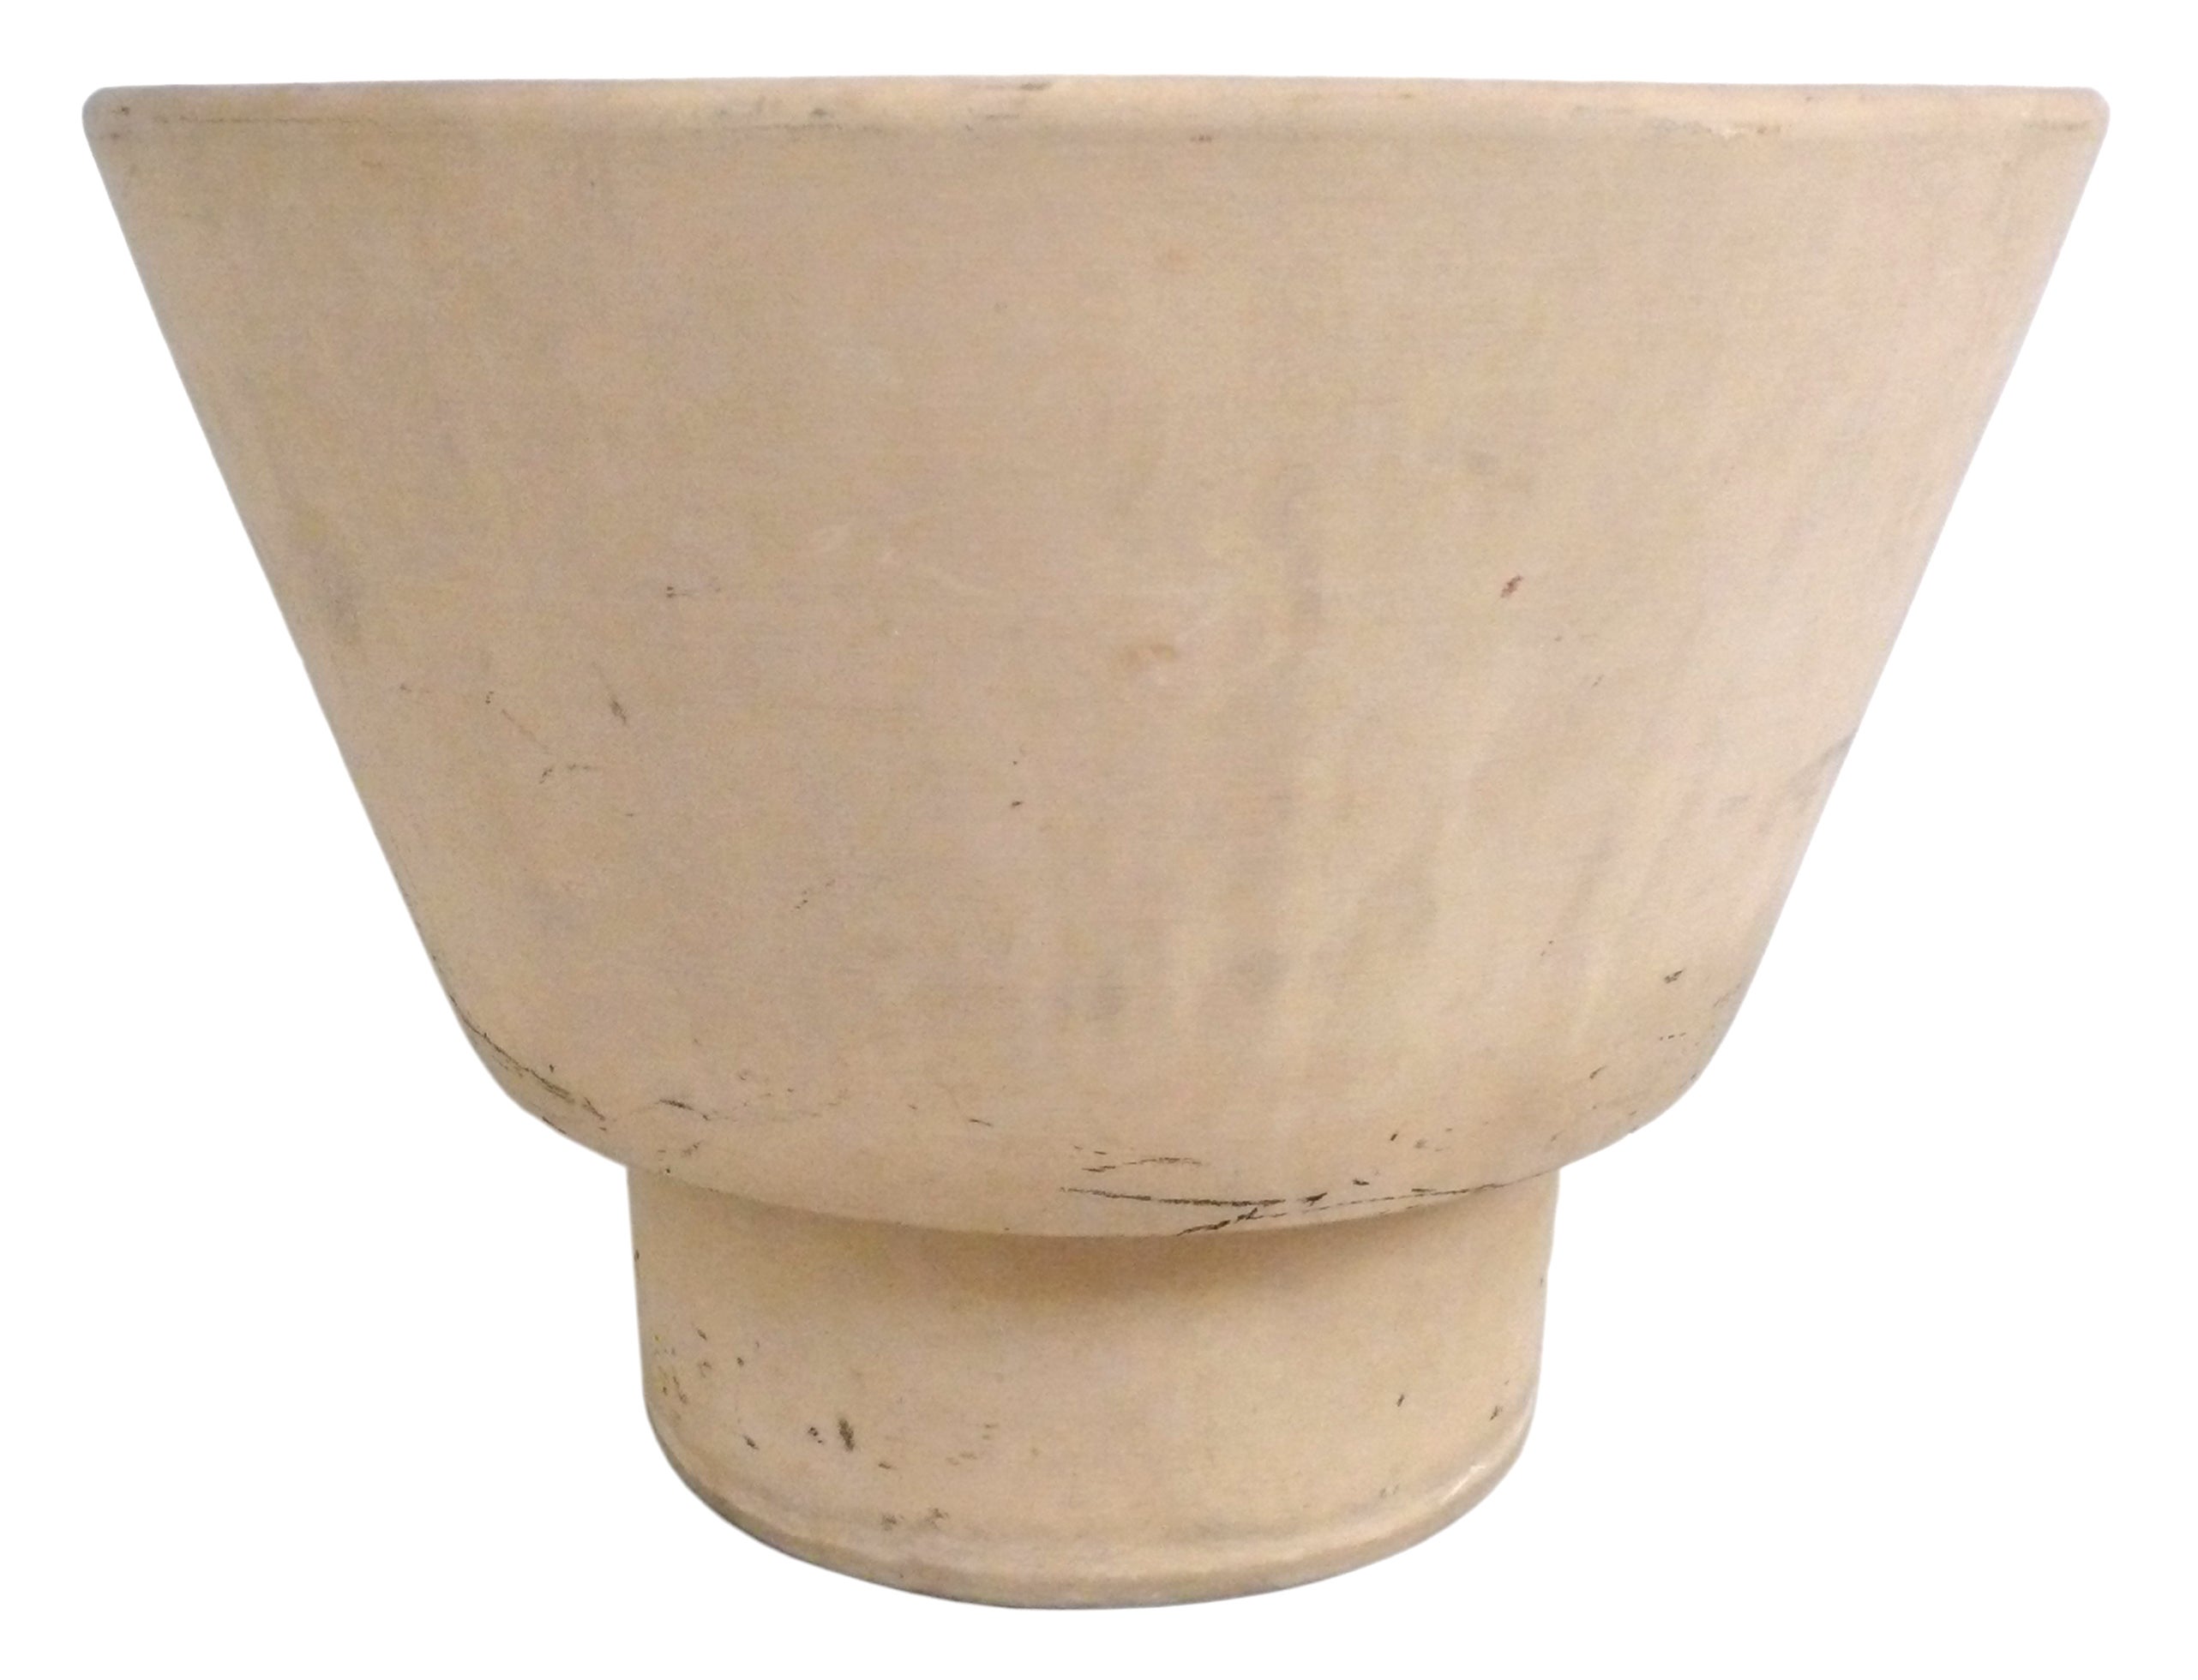 Bisque "M-1" Planter by Paul McCobb for Architectural Pottery